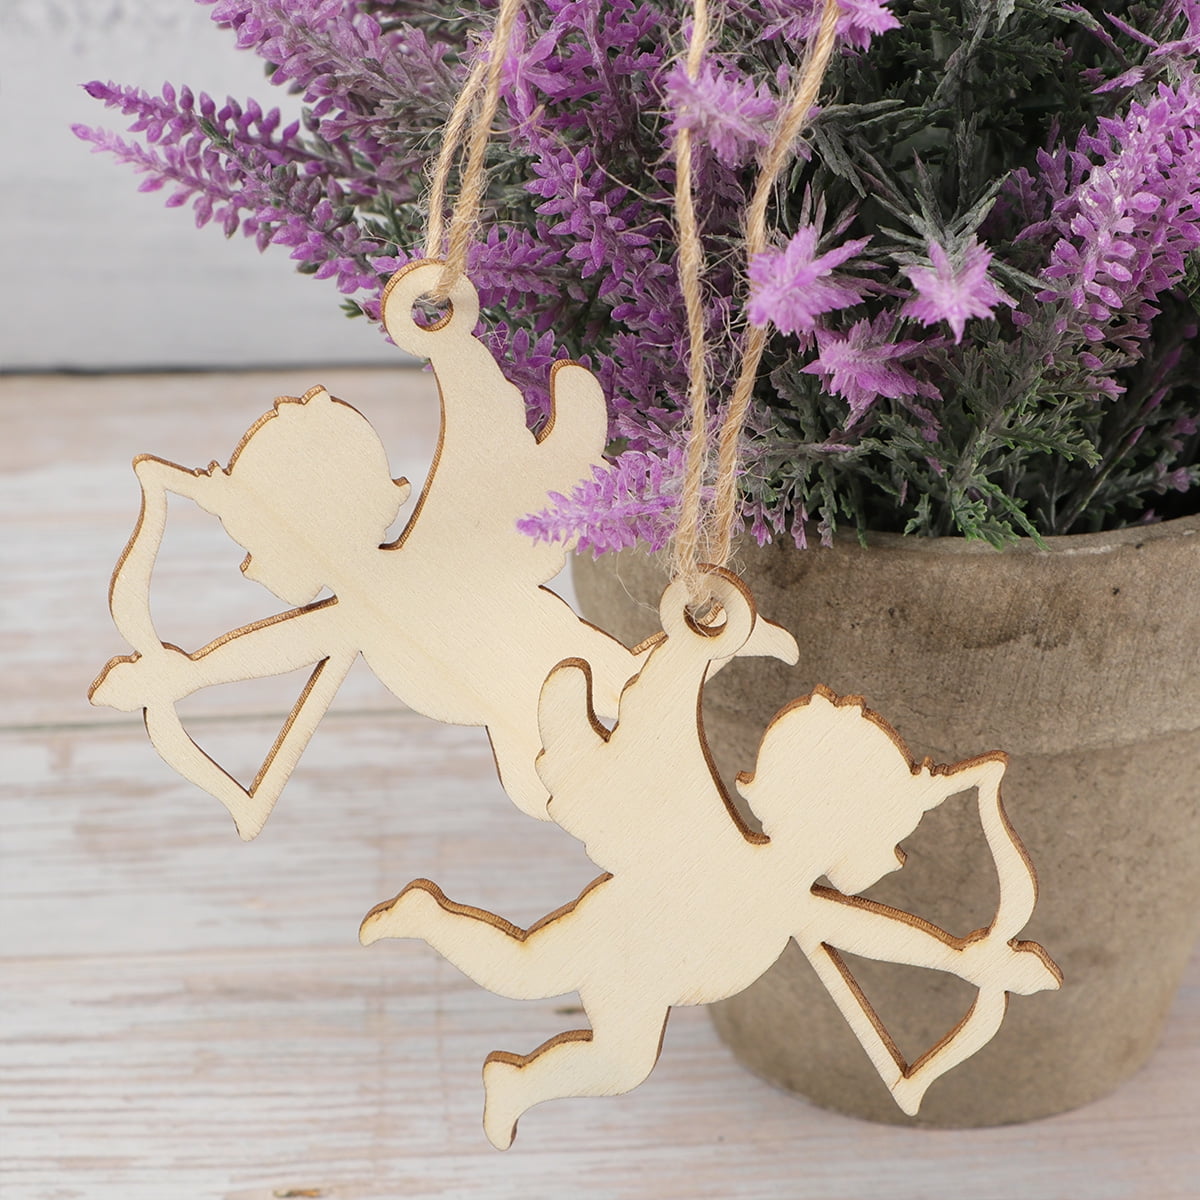 Details about   10PCS Cupid Shape Lovely Wooden Hanging Ornaments with Hemp Rope for Christmas 